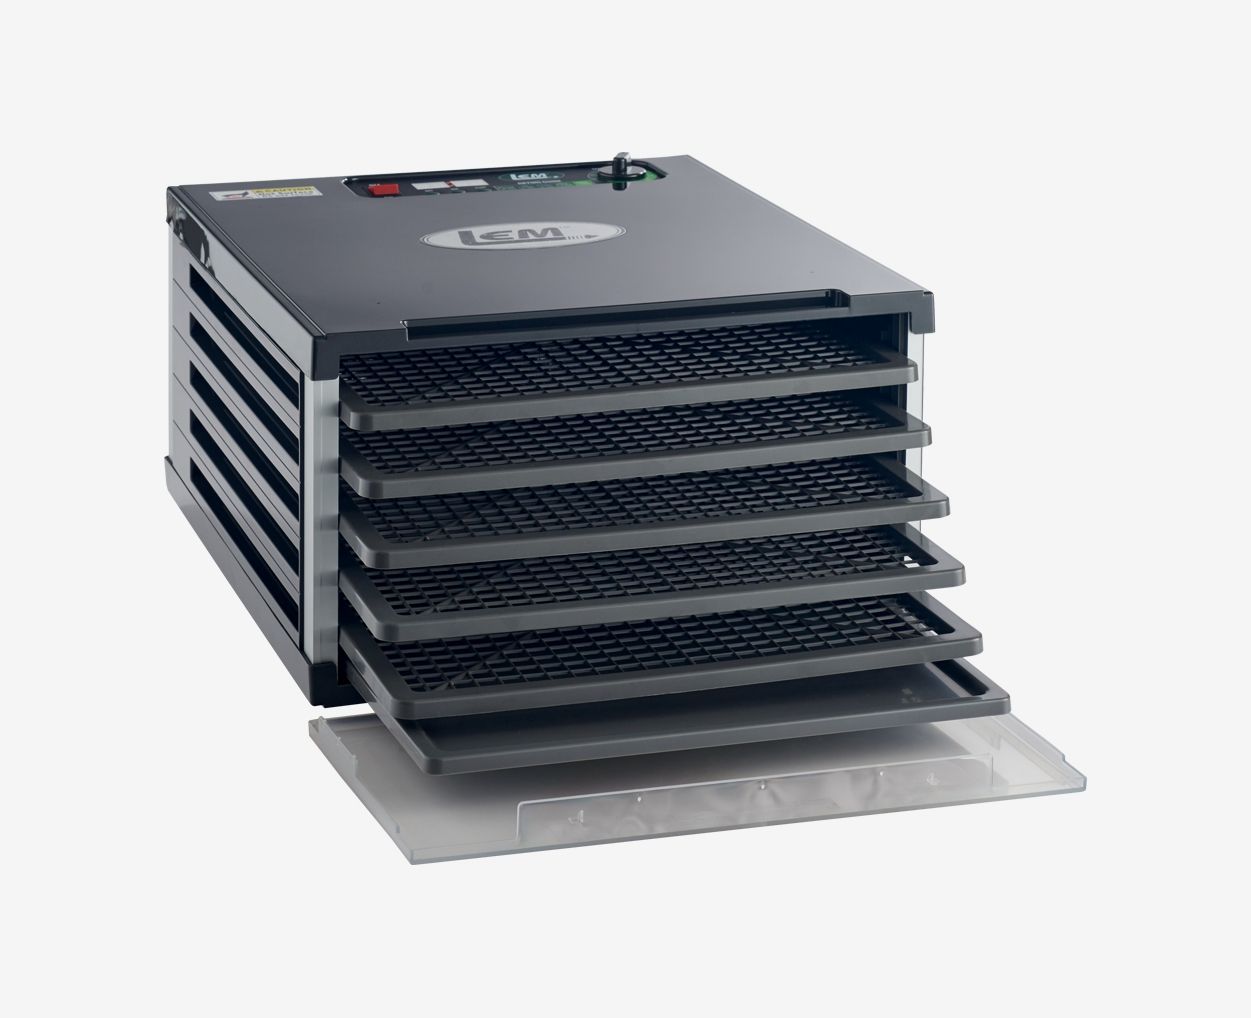 5 Best Dehydrators for Jerky – Reviews and Buying Guide – The